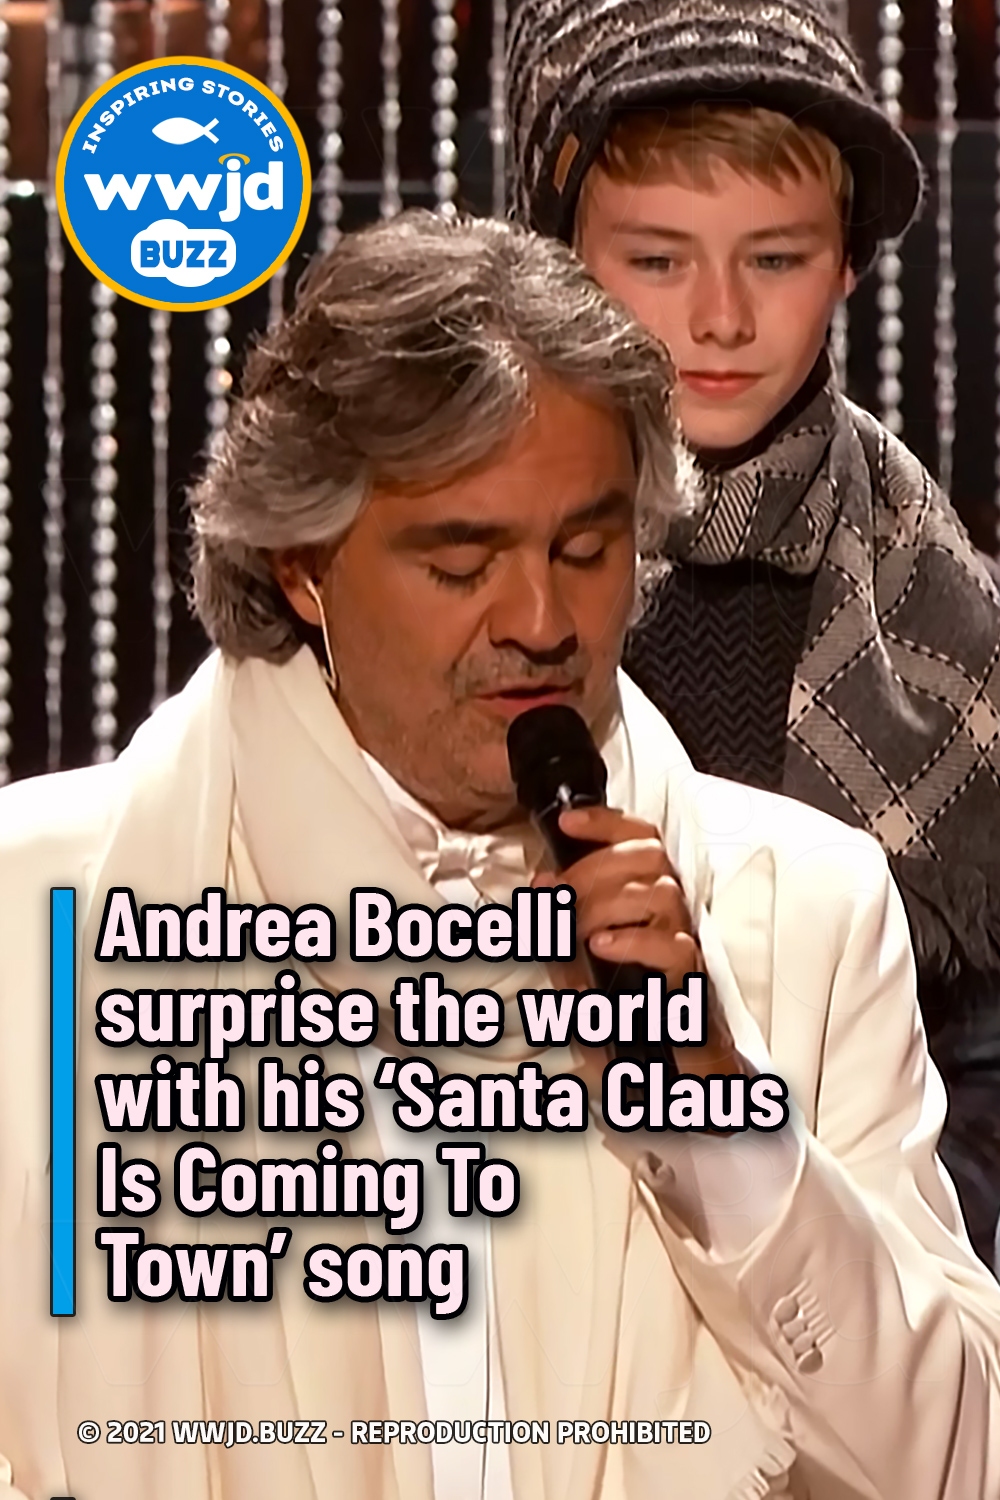 Andrea Bocelli surprise the world with his ‘Santa Claus Is Coming To Town’ song